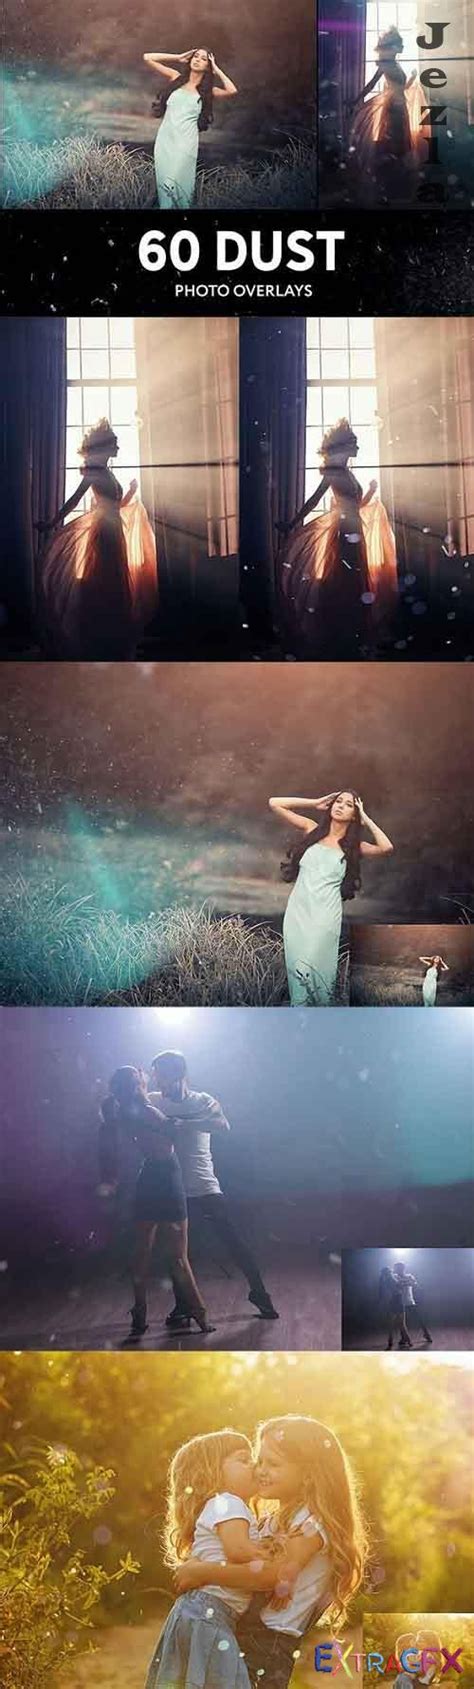 Floating Dust Photo Overlays Extragfx Free Graphic Portal Psd Sources Photoshop